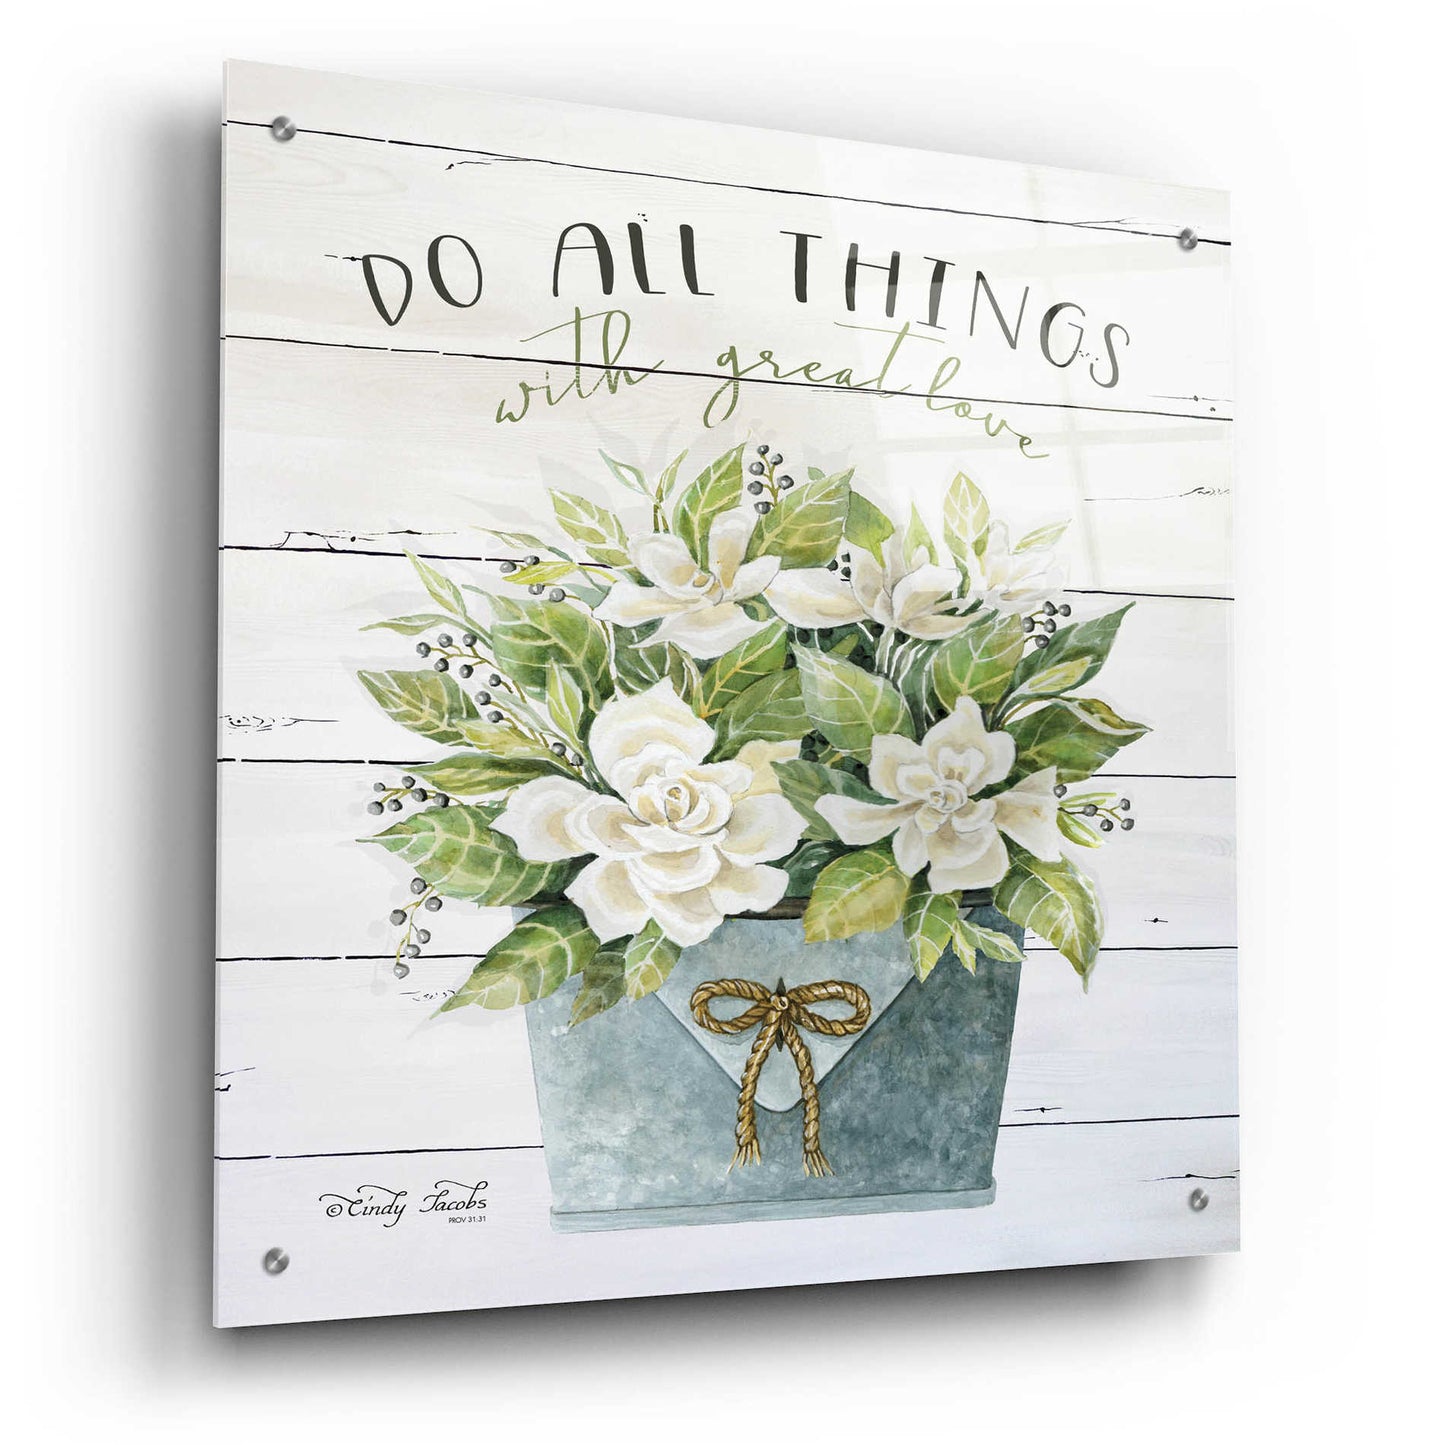 Epic Art 'Do All Things with Great Love' by Cindy Jacobs, Acrylic Glass Wall Art,24x24